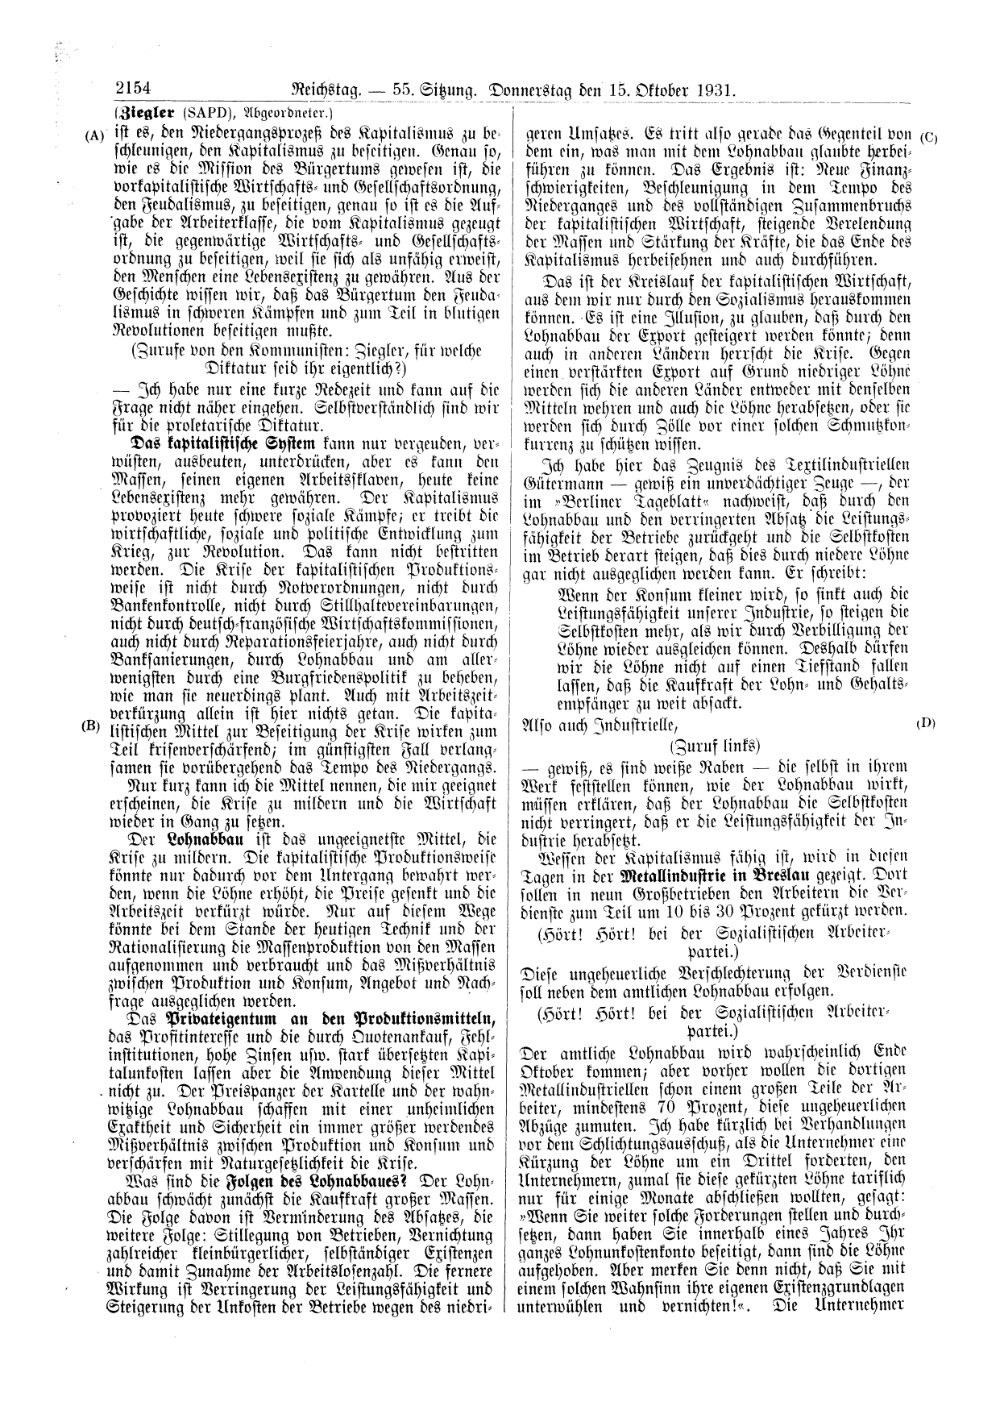 Scan of page 2154